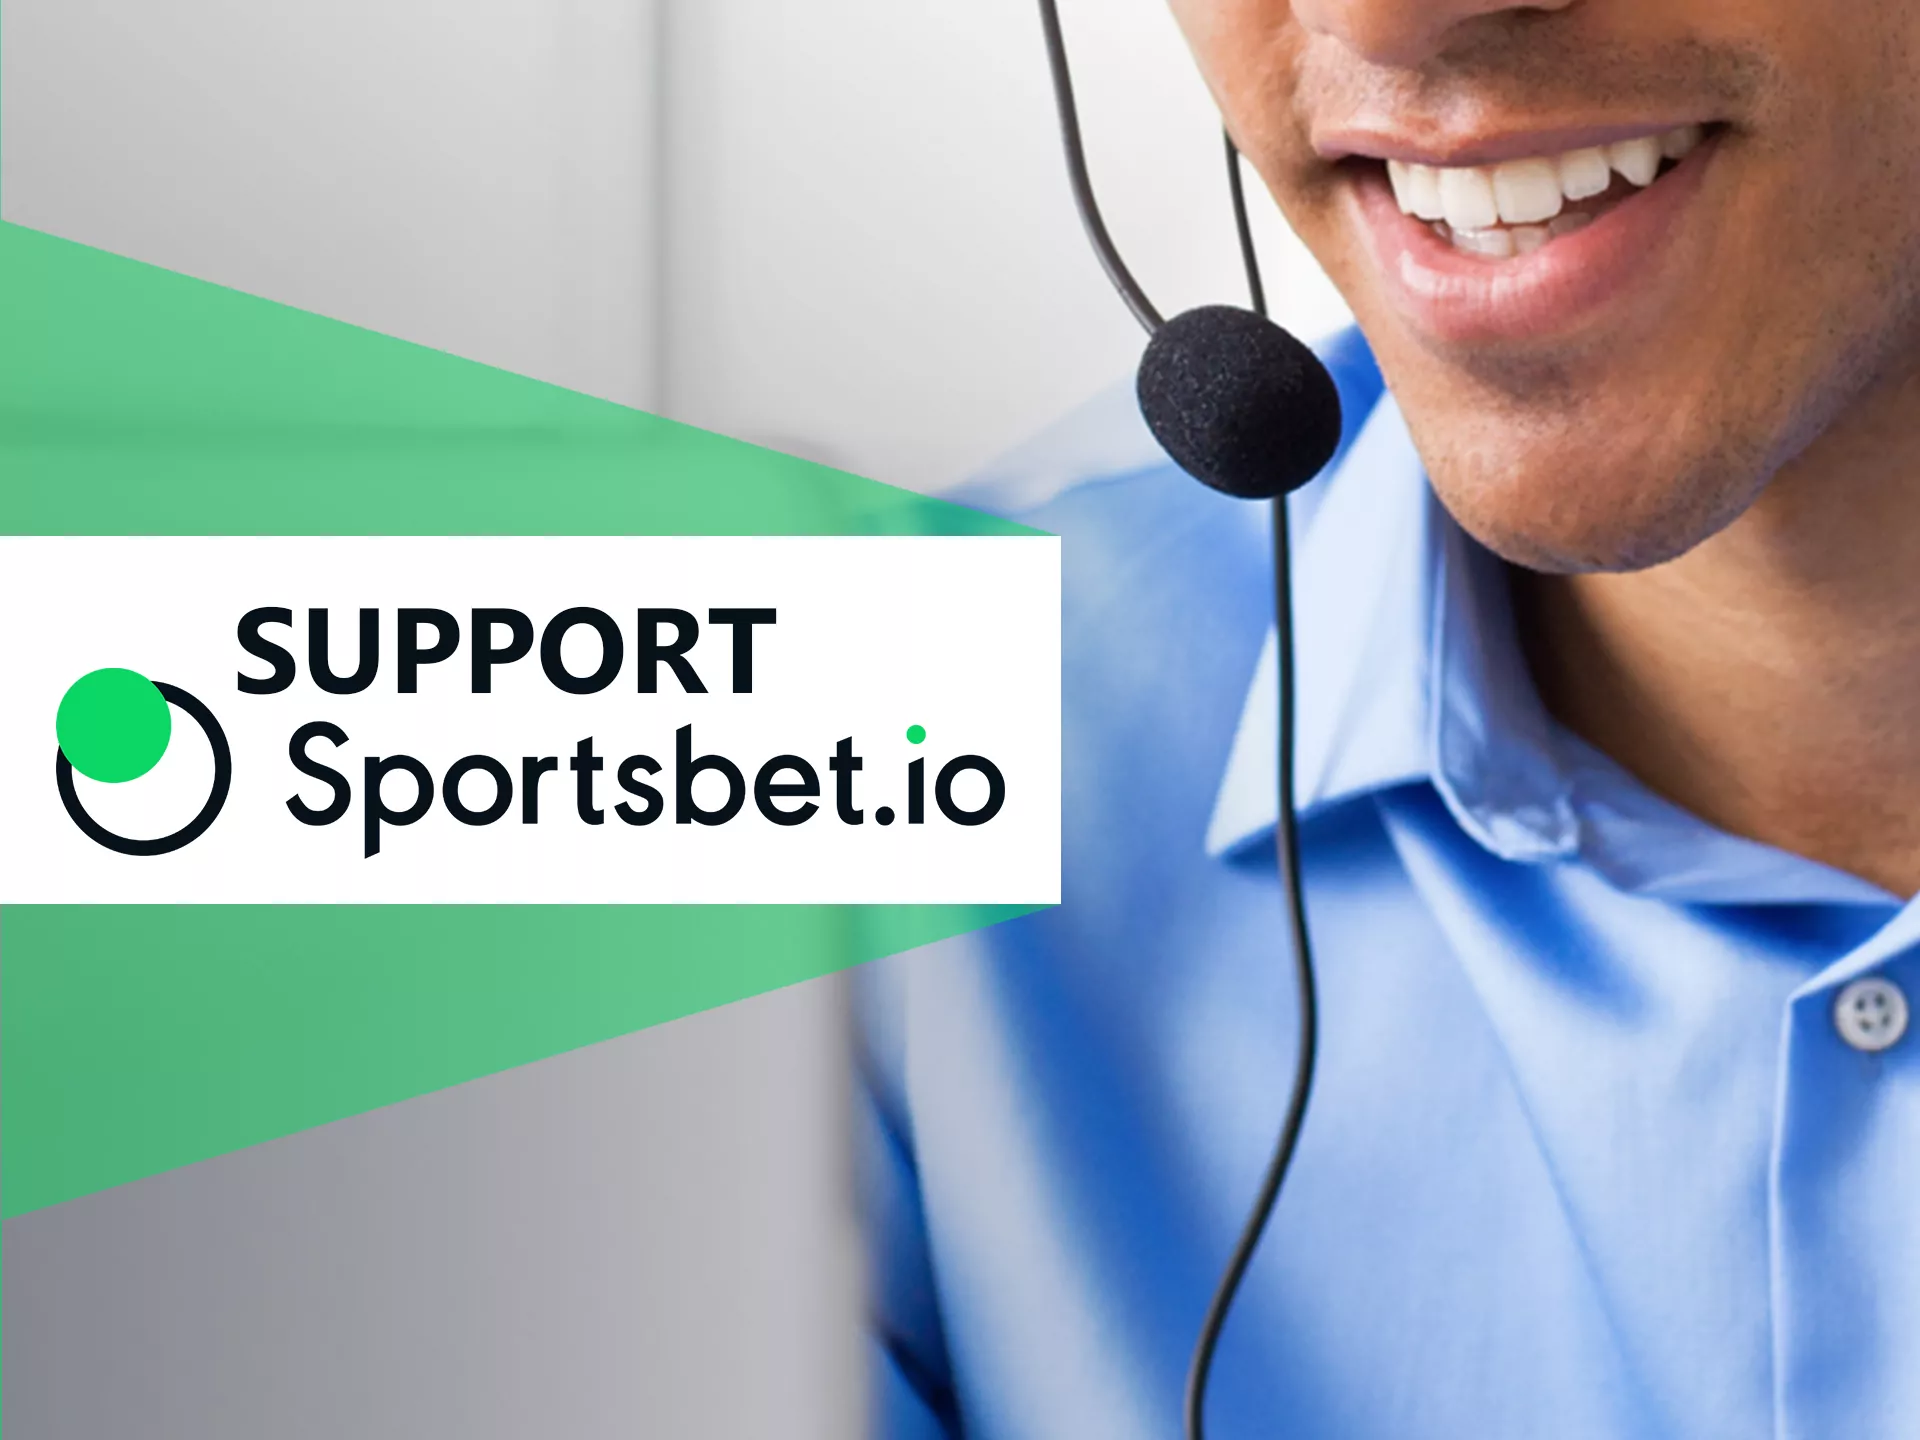 Contact the Sportsbet support team via your smartphone.